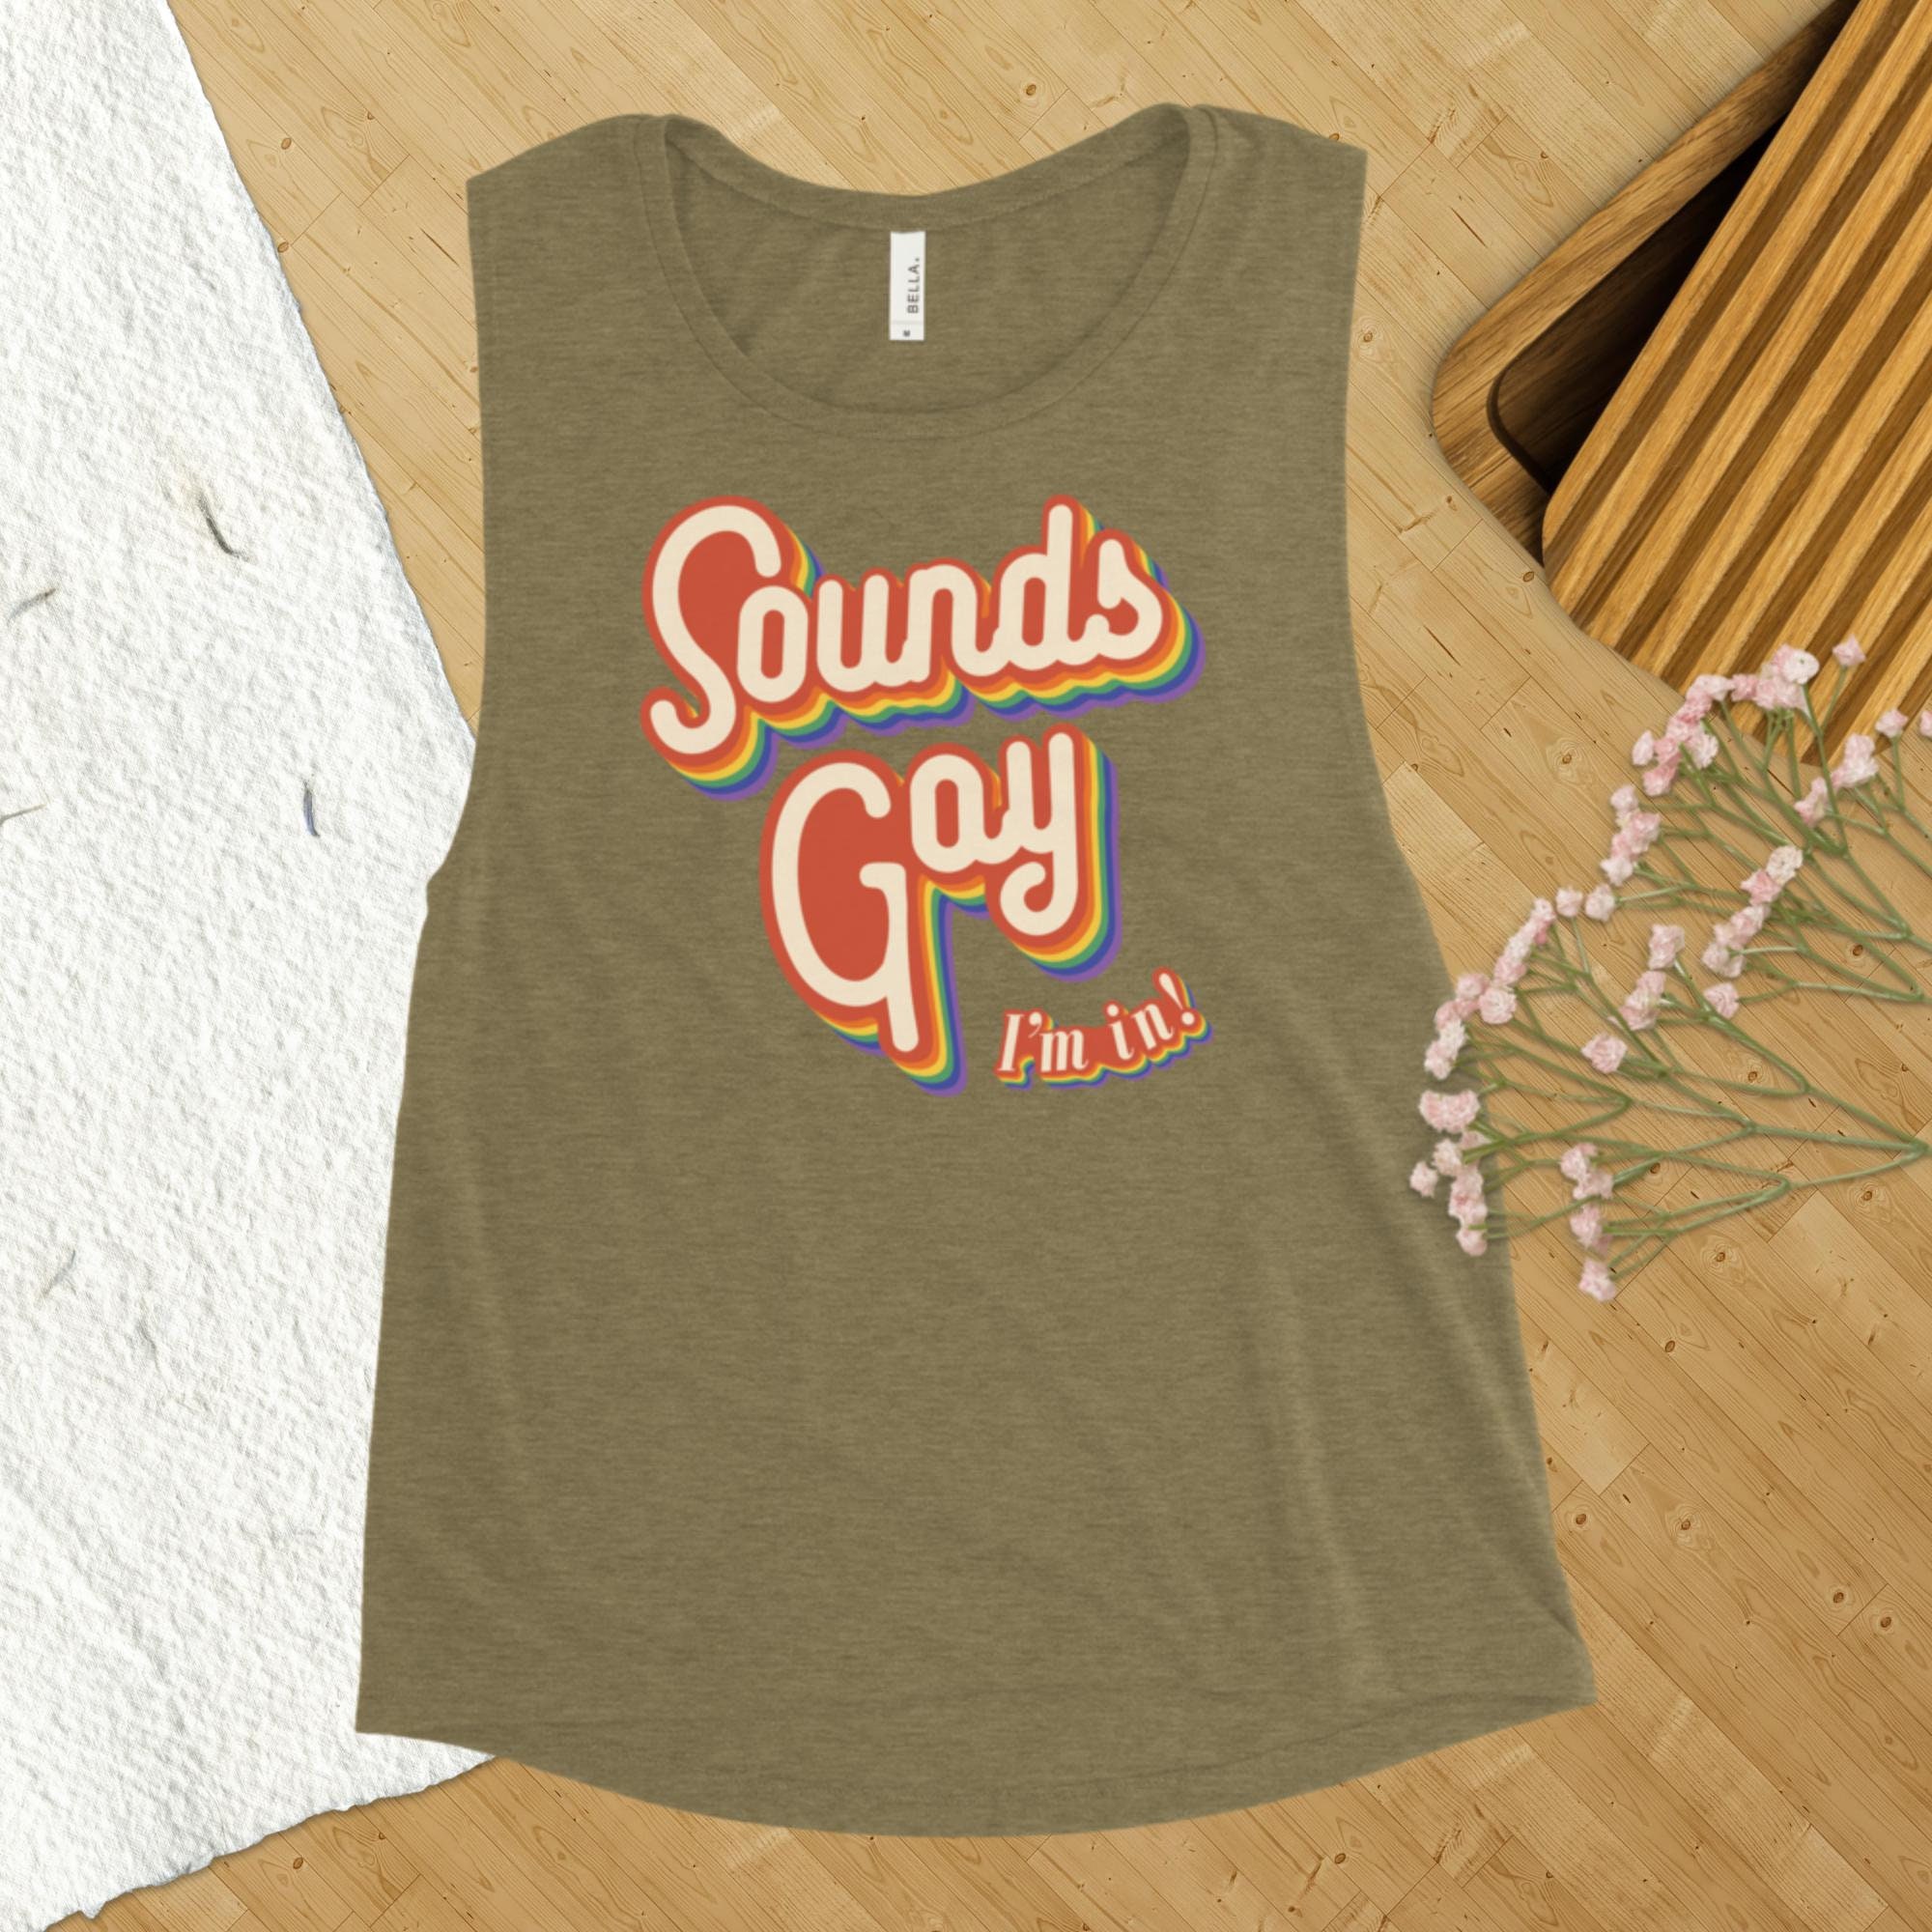 Discover Sounds Gay I'm In! | LGBTQ+ Pride Design | Muscle Tank